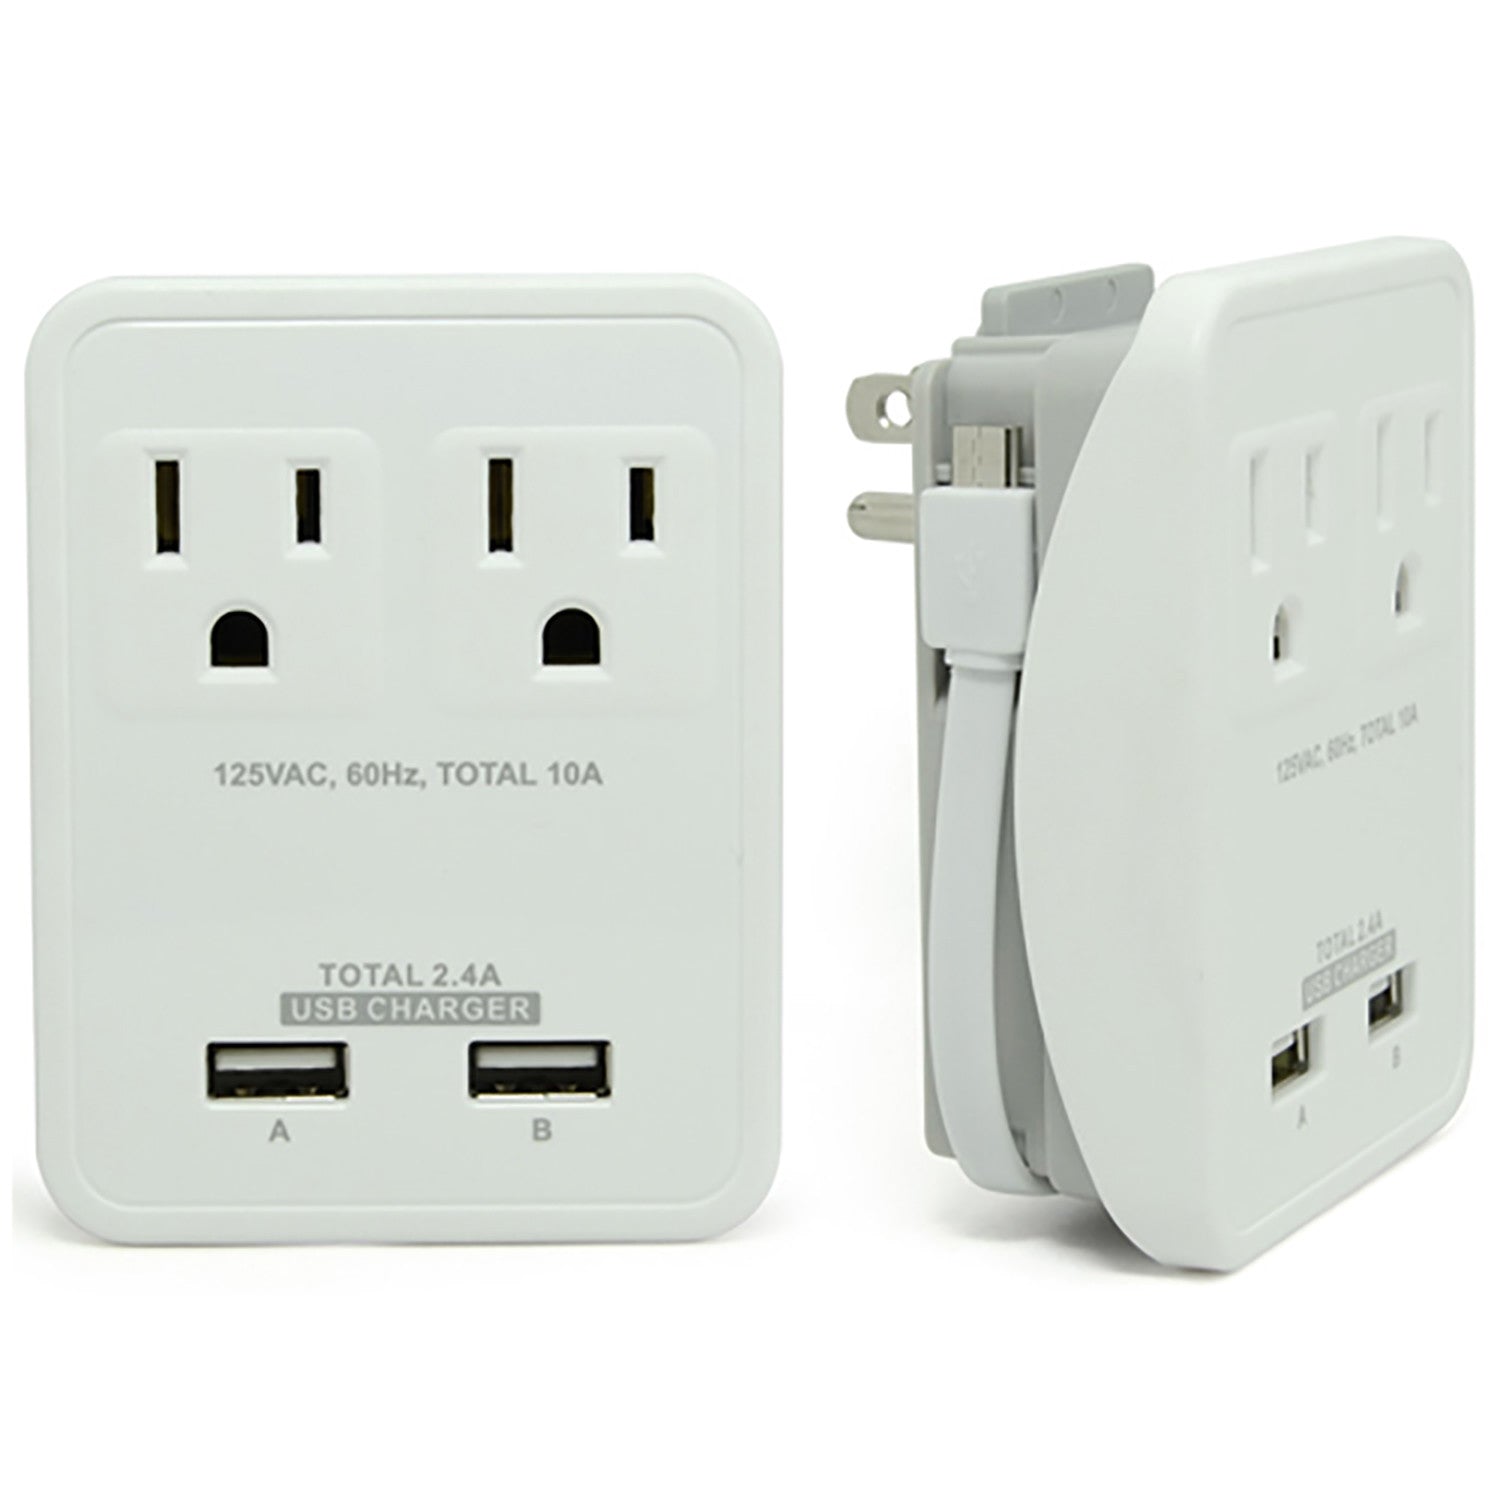 Compact Power Station 2.4 Amp Dual USB Ports, 2 AC Outlet Wall Charger with an attached 7 inch Micro USB cable by RND - RND Power Solutions - 6